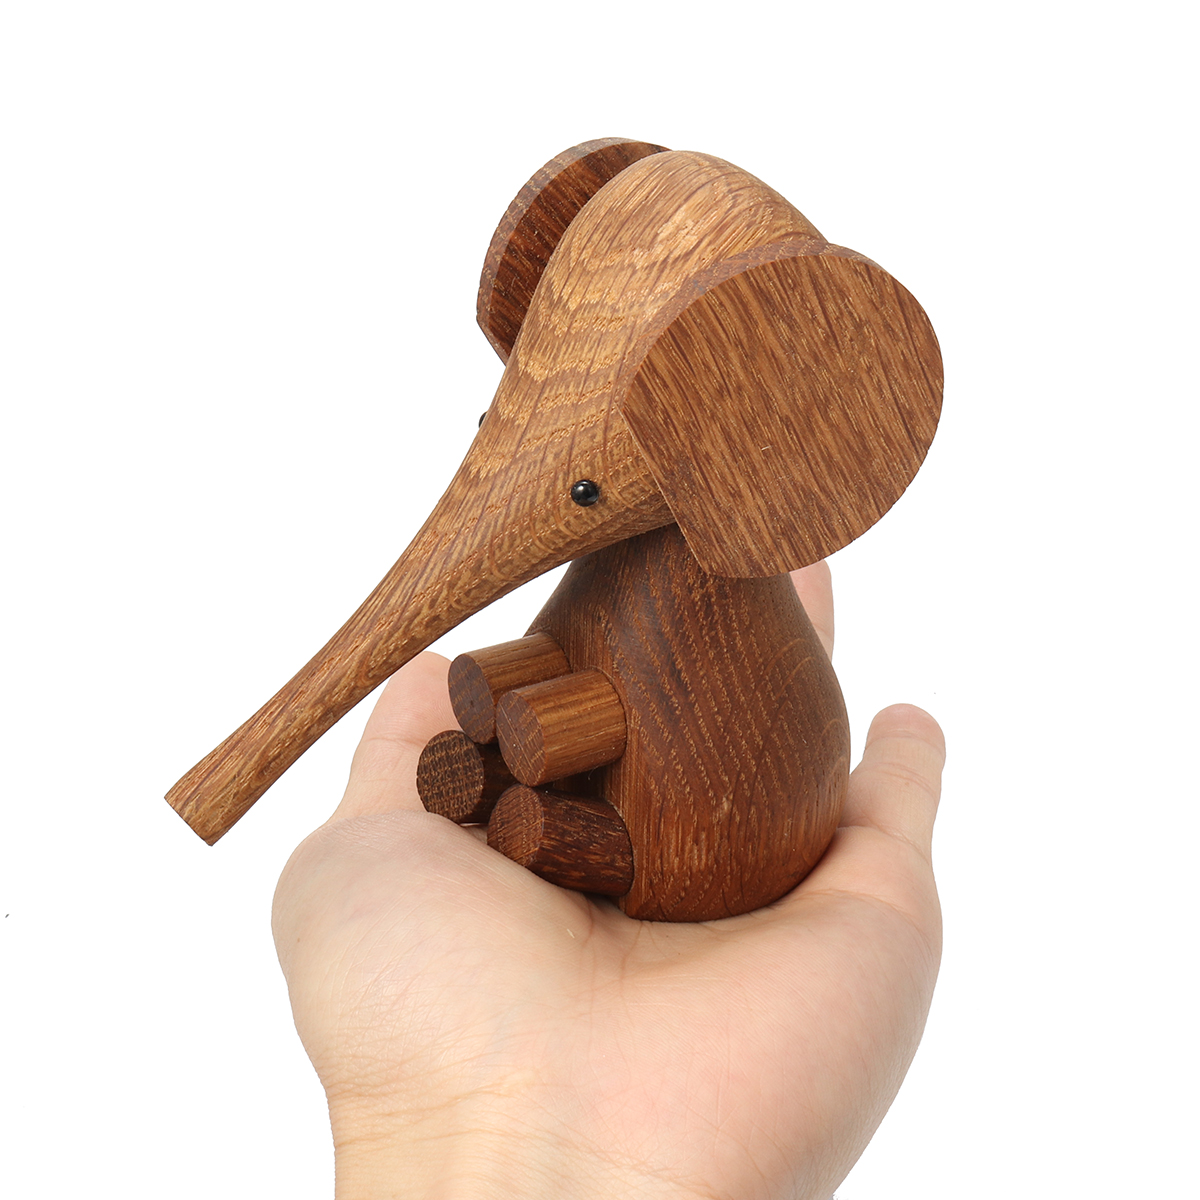 Adjustable-Handicraft-Elephant-Wooden-Animal-Doll-Smooth-Surface-Home-Decorations-Gift-1640775-9